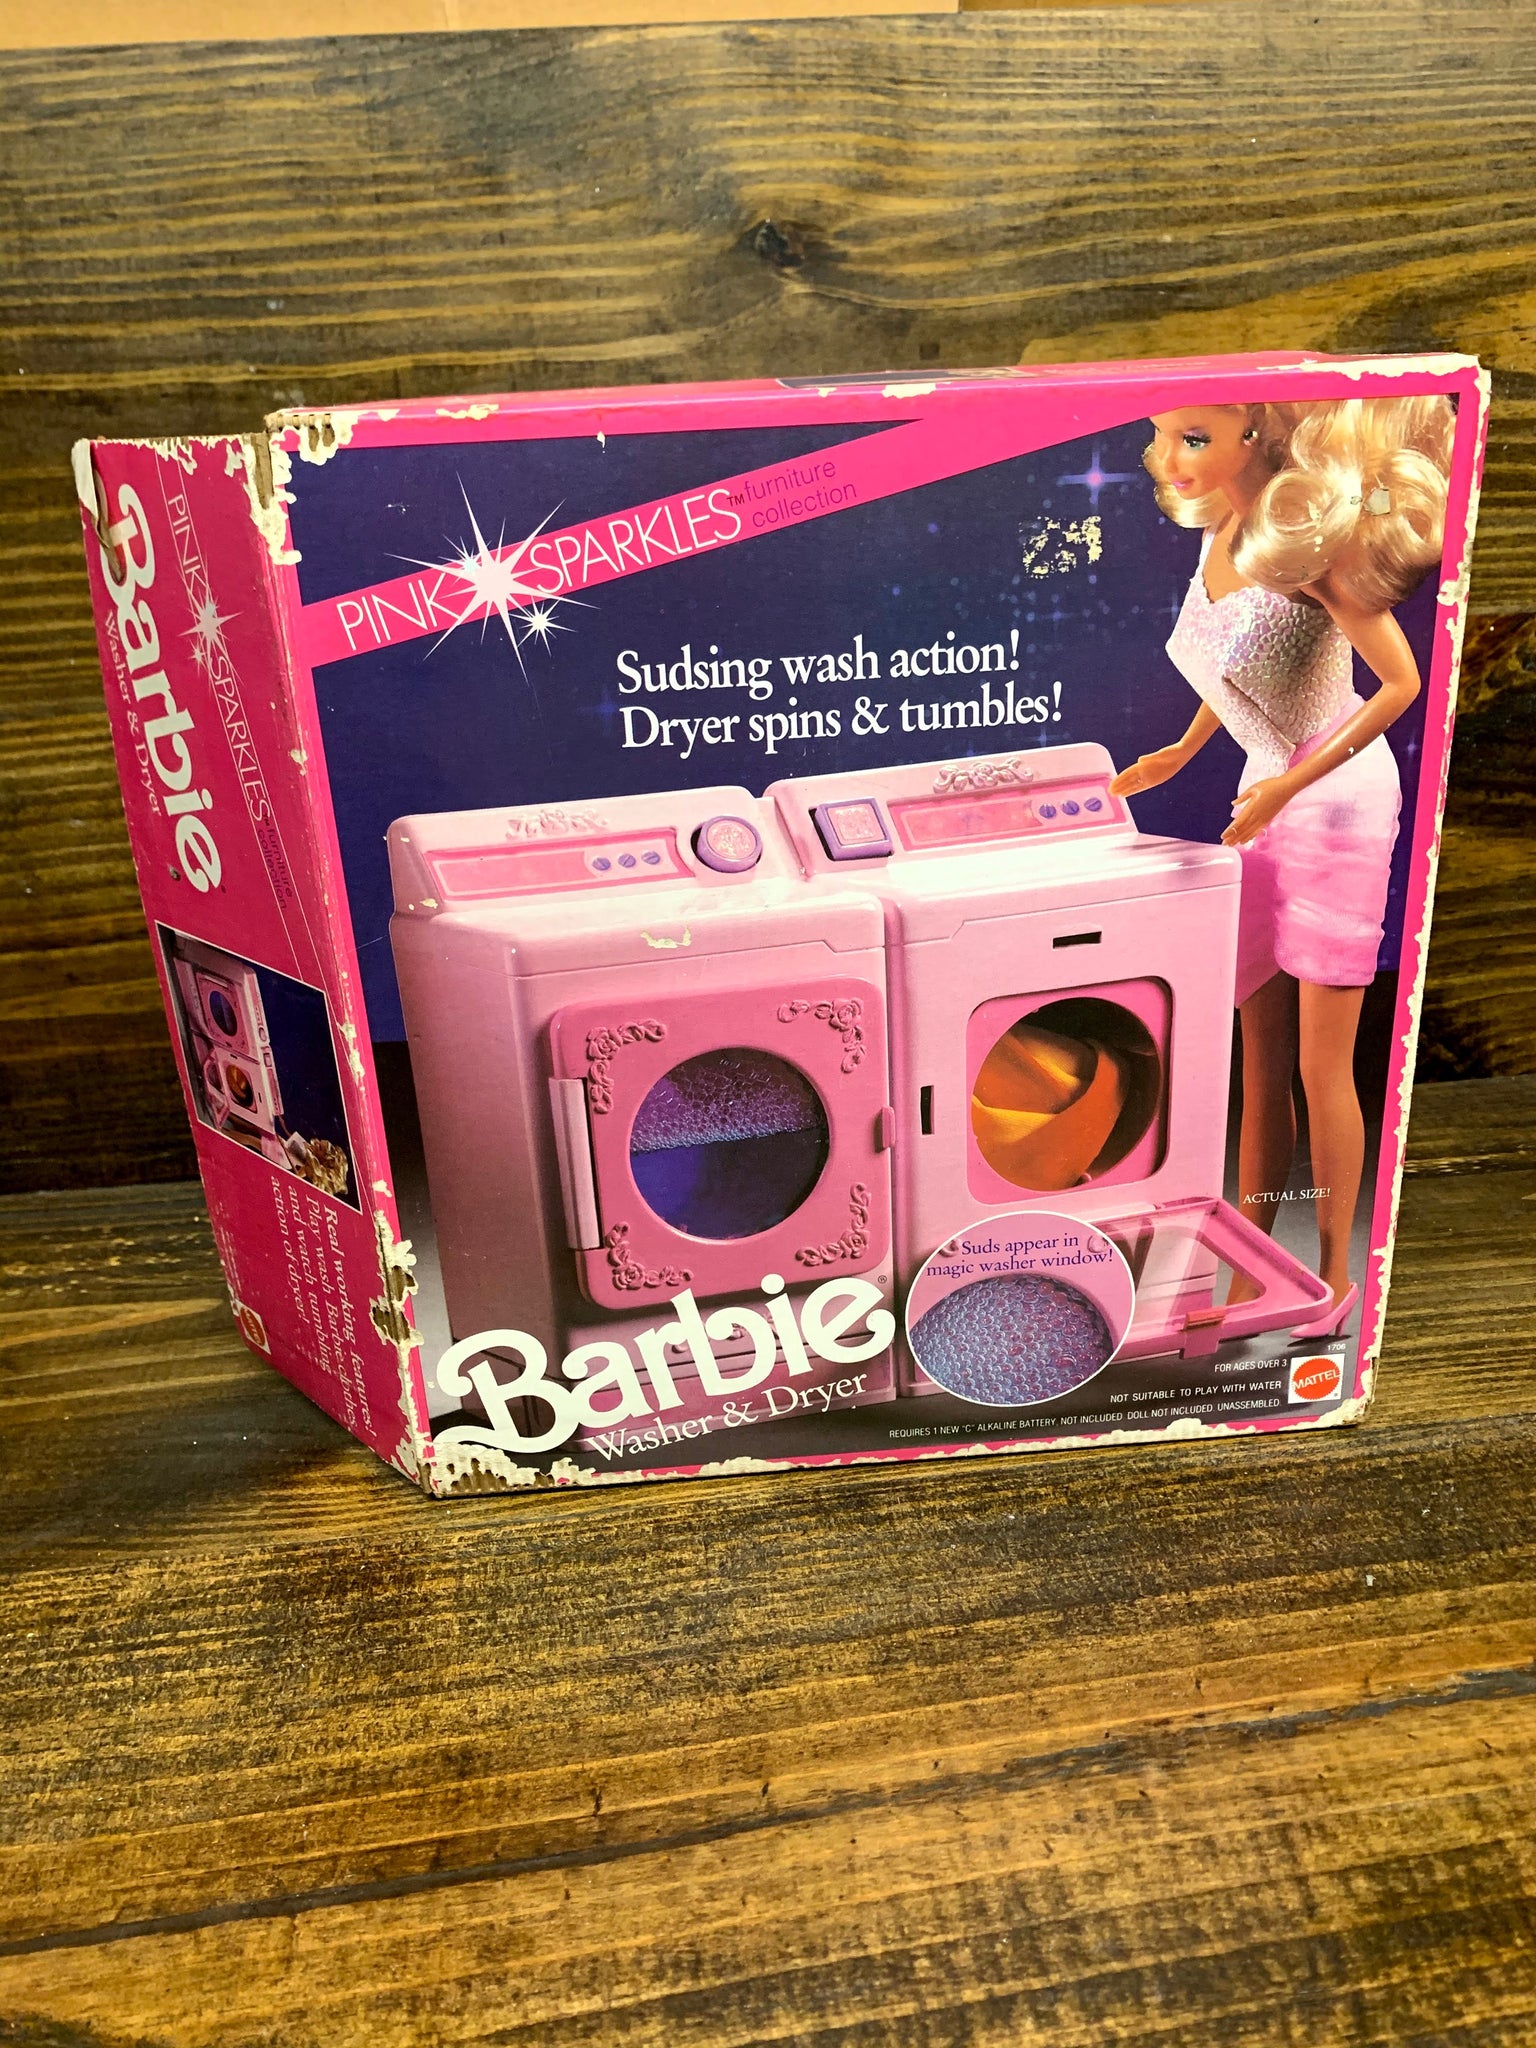 SOLD > Barbie washer & dryer - with tumbling action $75, dealer